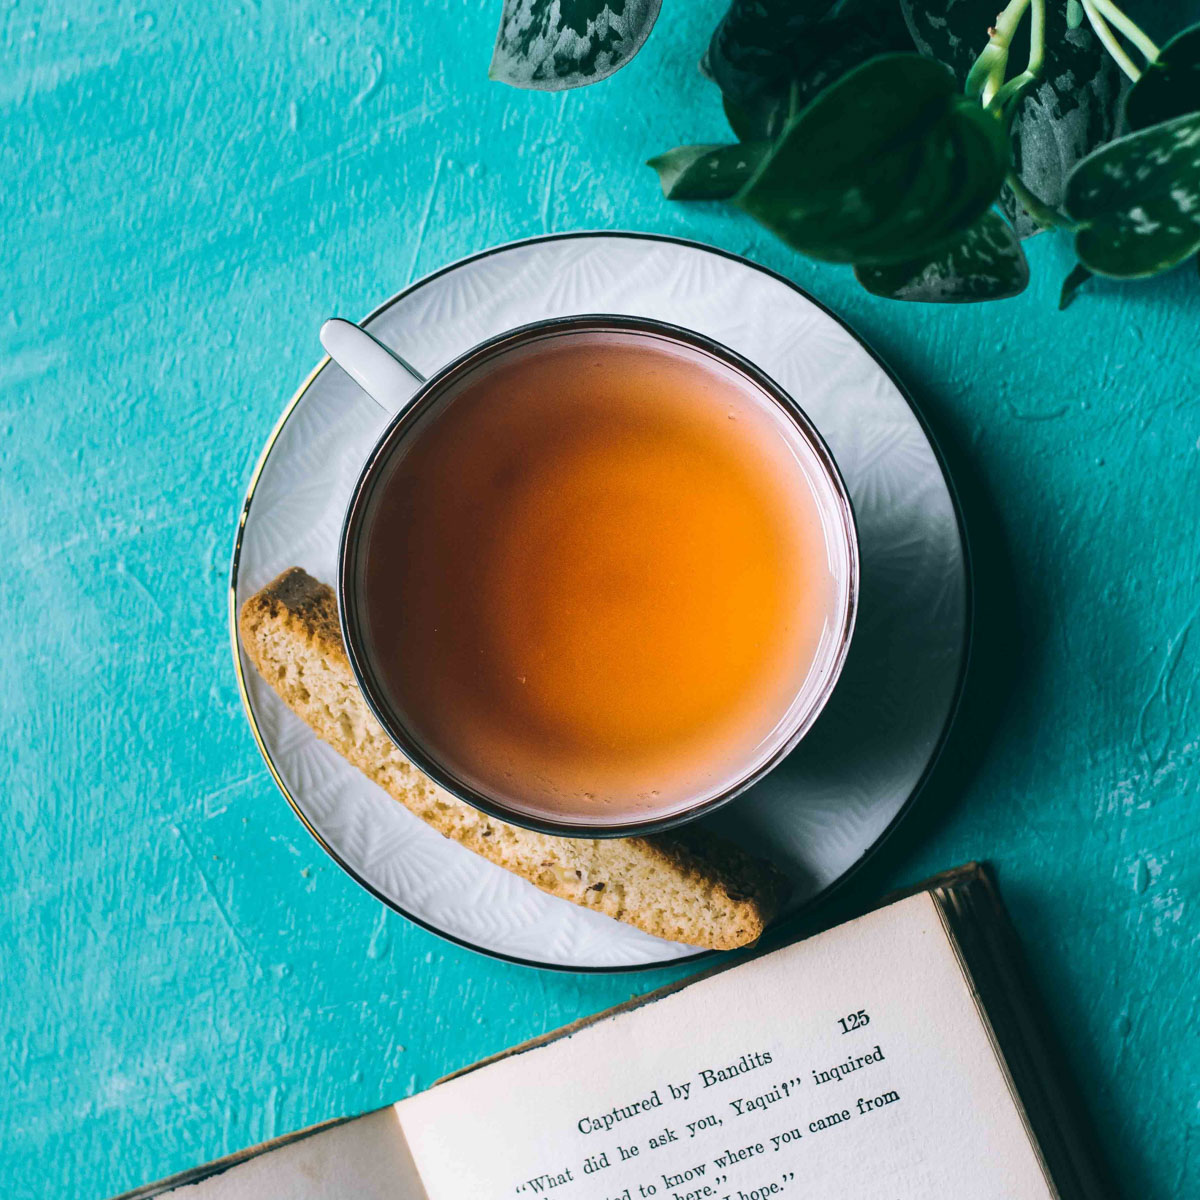 oolong tea in cup with biscotti, book on table with plant